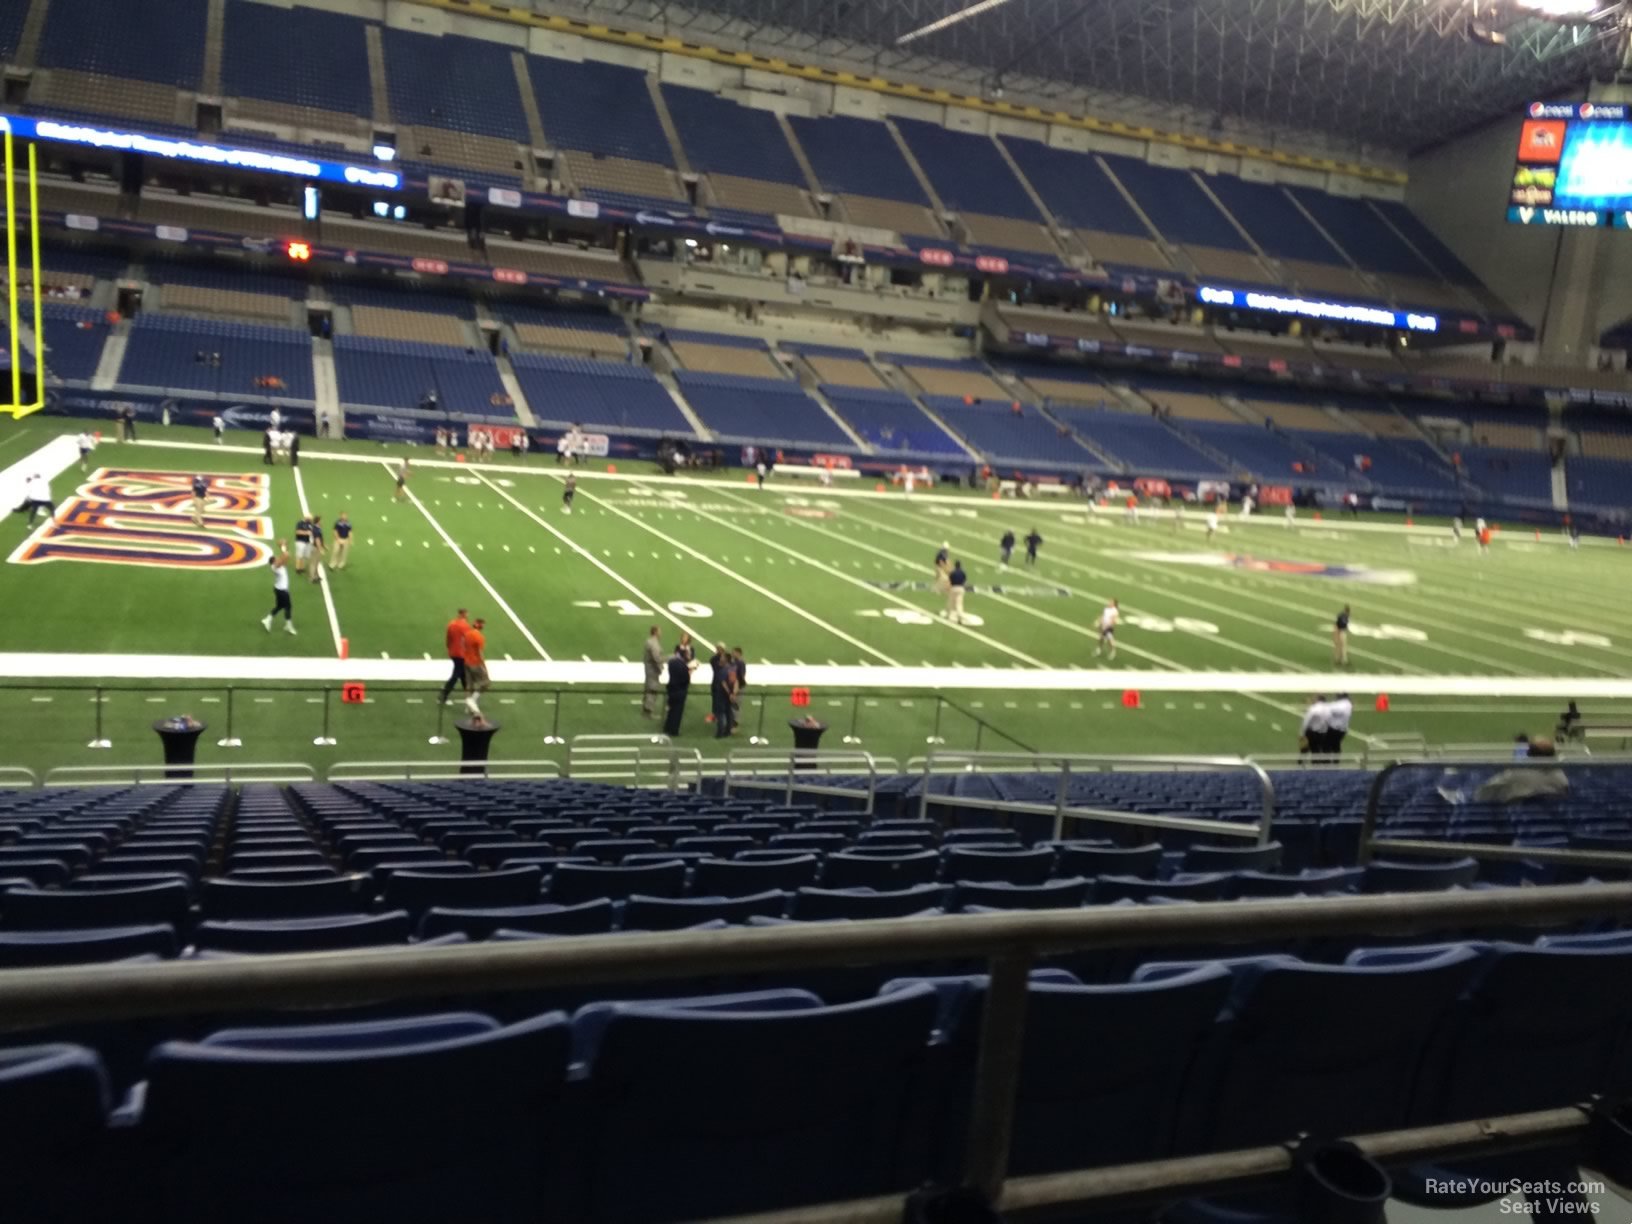 section 138, row 18 seat view  for football - alamodome